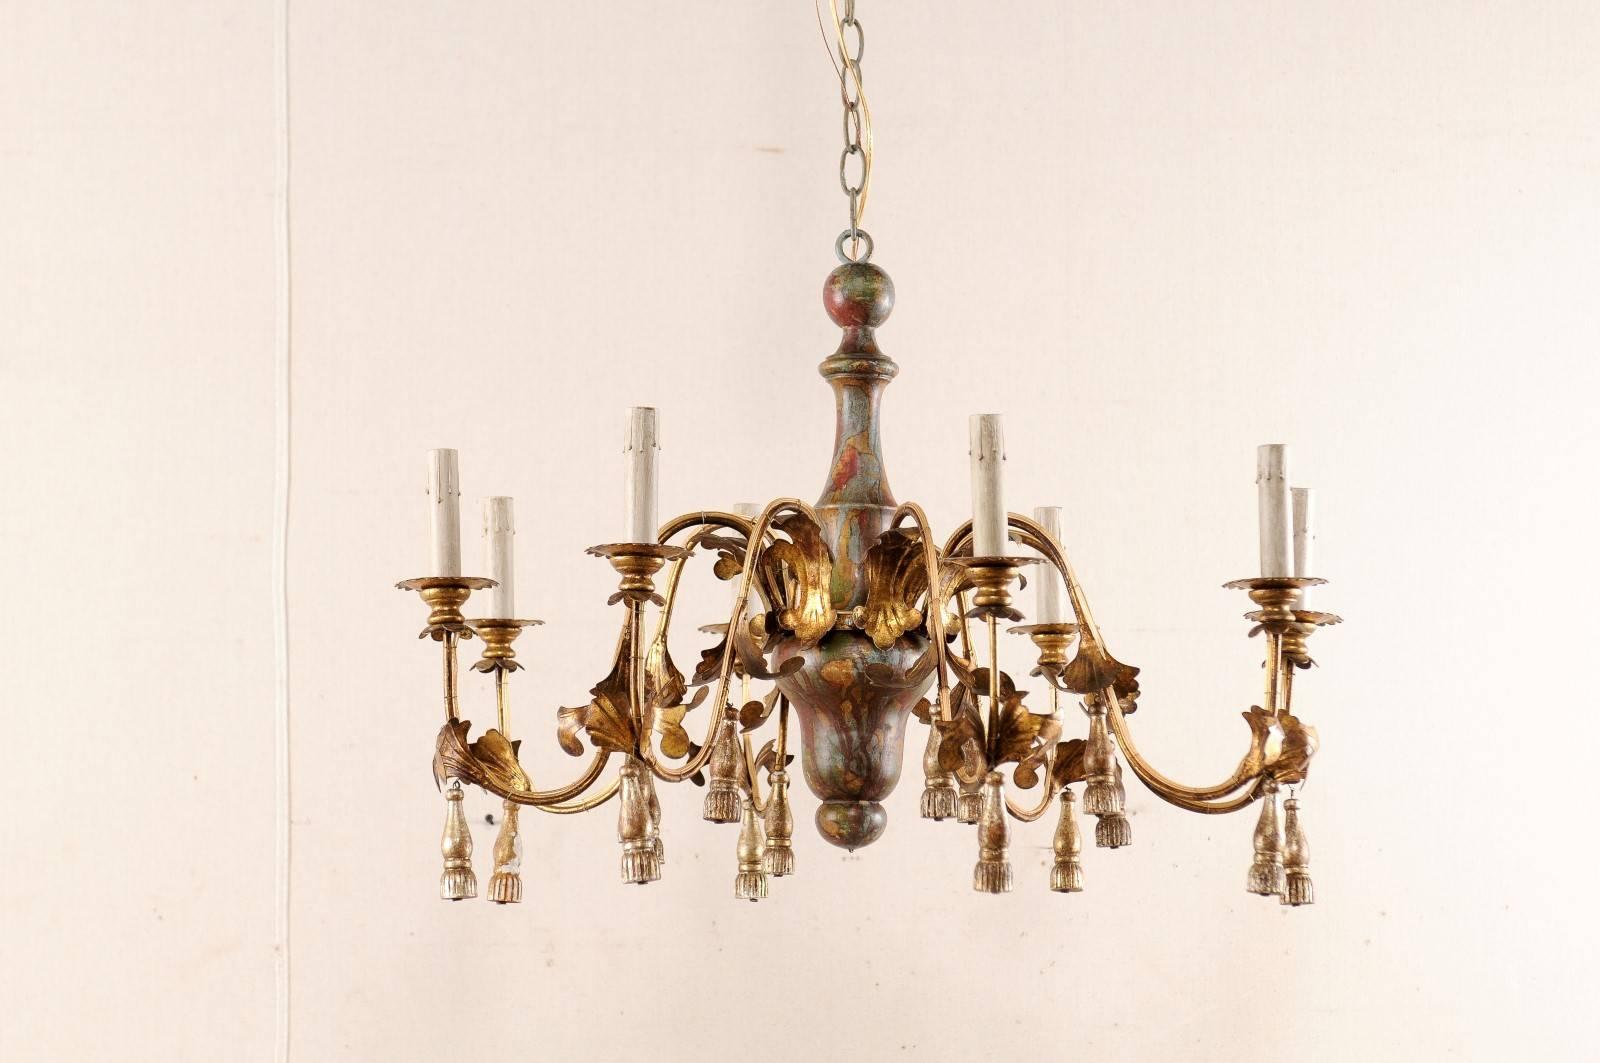 An Italian Mid-Century eight-light chandelier. This Italian vintage chandelier features a carved wood center with eight swooping arms decorated with tassels hanging from their lowest swoop, emerging from floral motifs. The carved wood center column